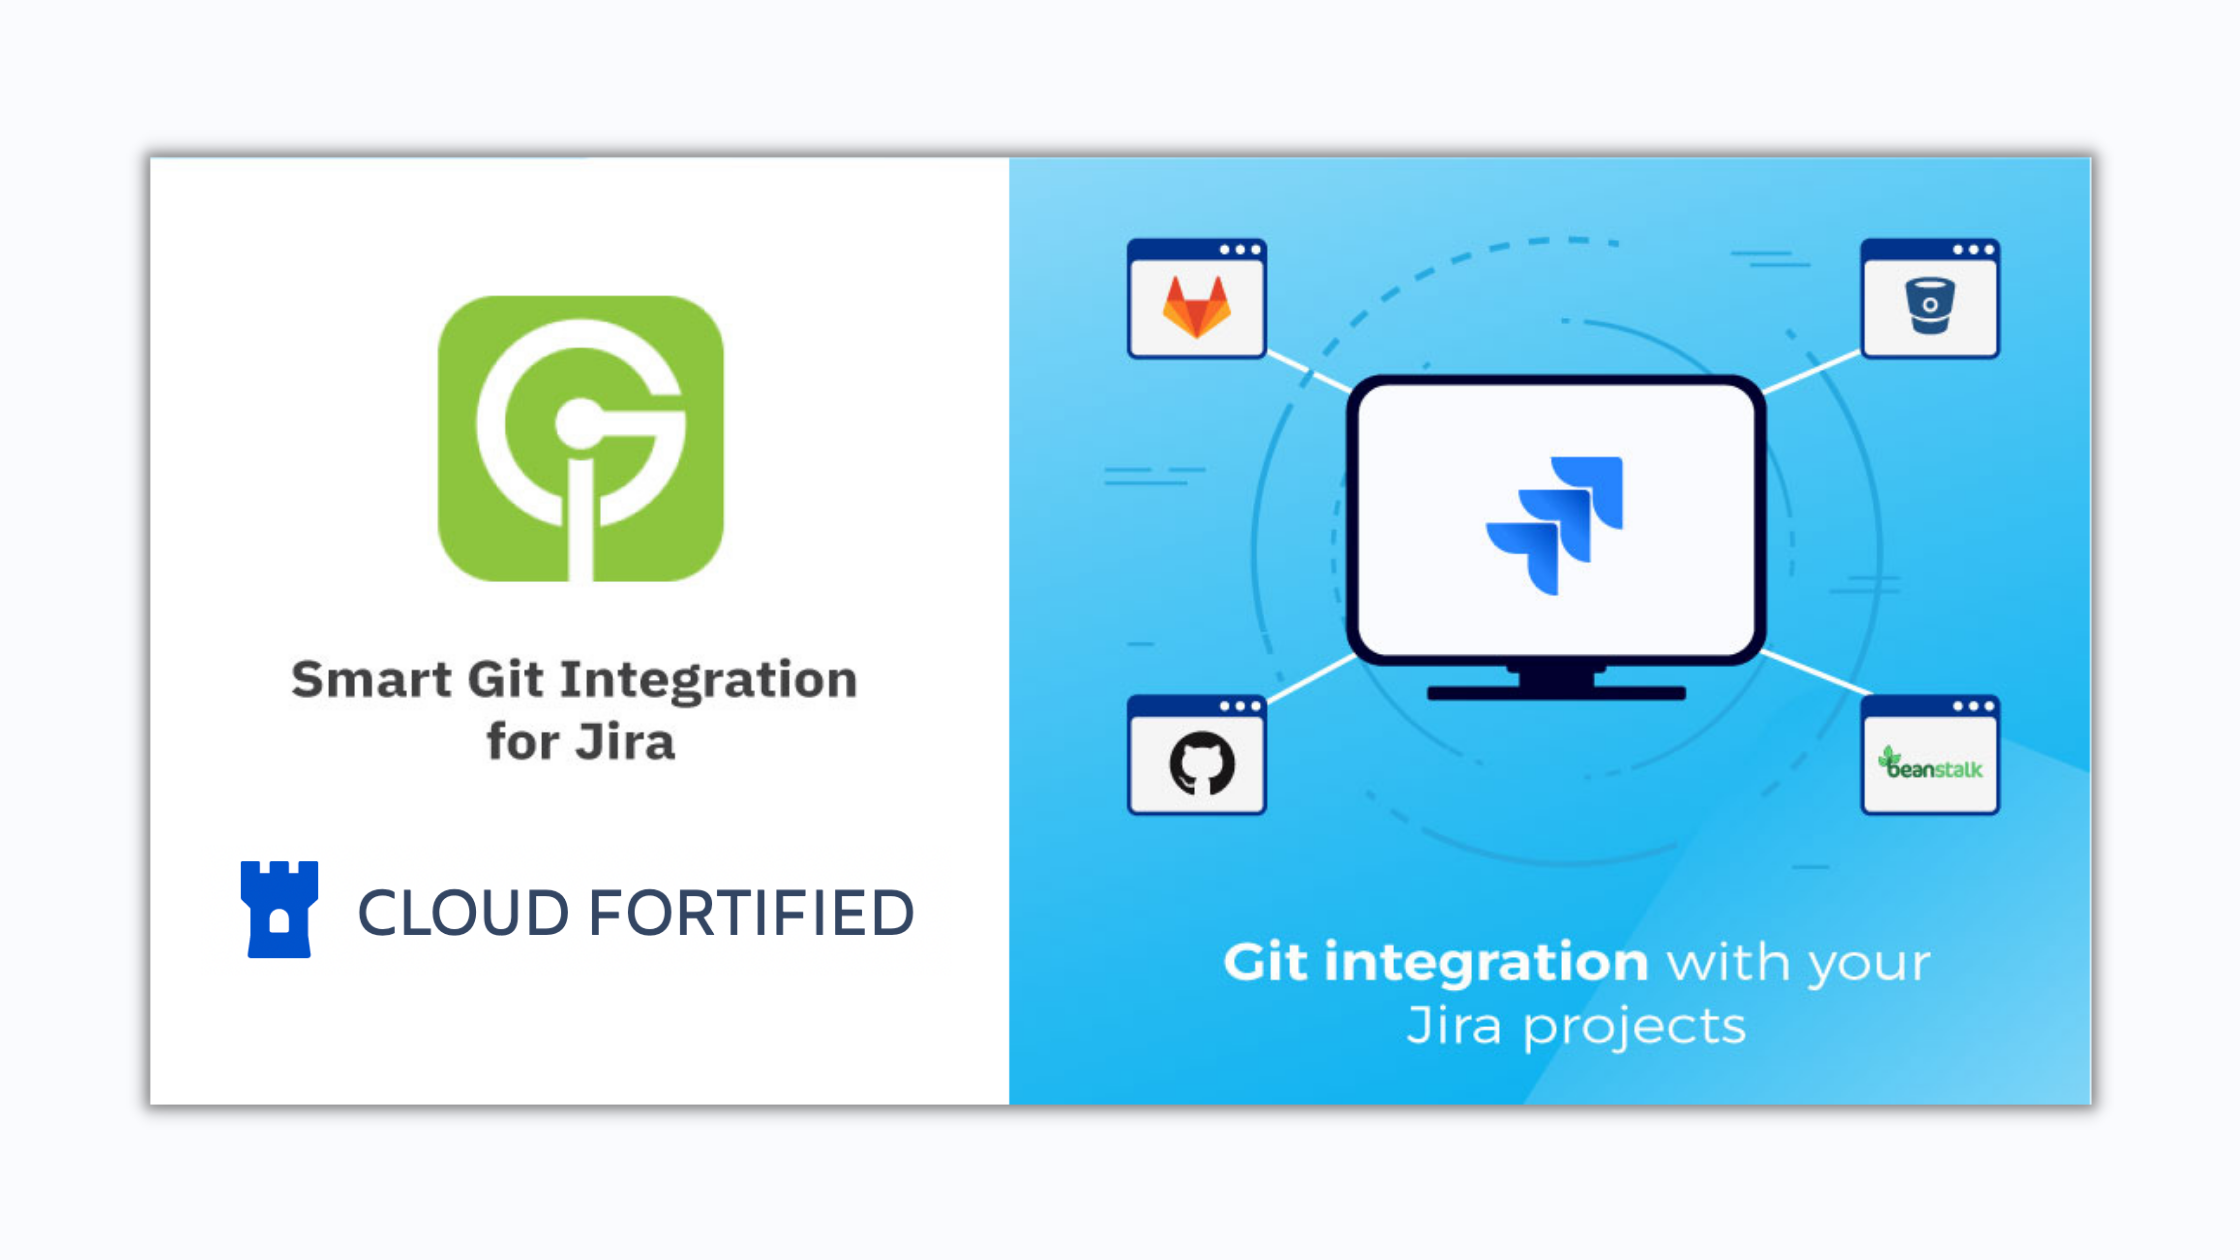 Smart Git Integration for Jira Has Been Recognized as a Cloud Fortified App by Atlassian